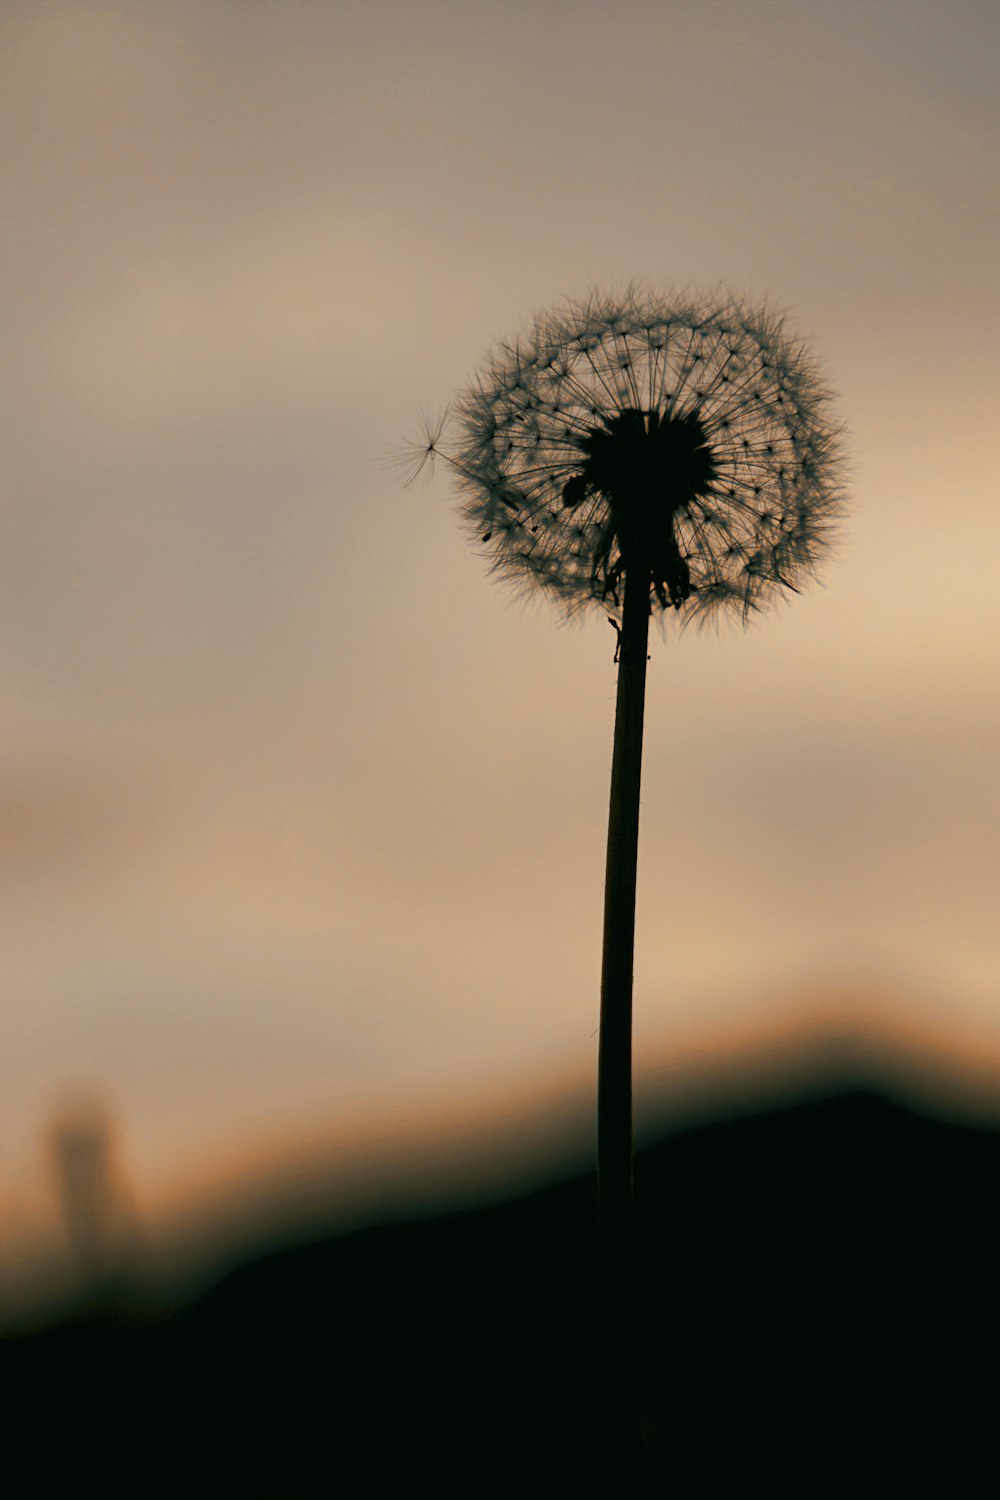 a dandelion in the foreground with a cloudy sky in the background